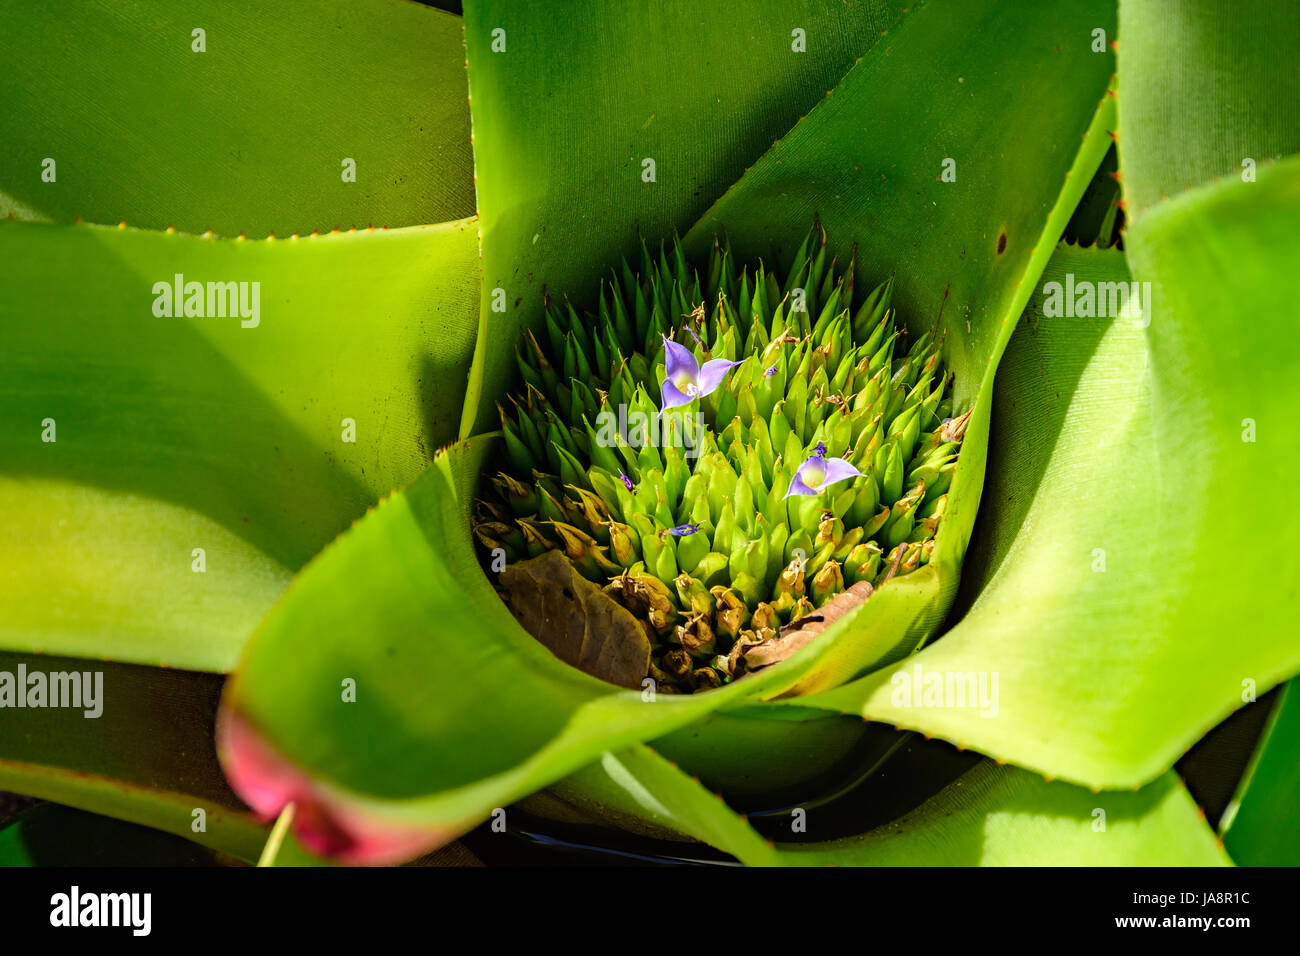 Detail of bromeliad with its leaves, circular shape, colors and texture features Stock Photo